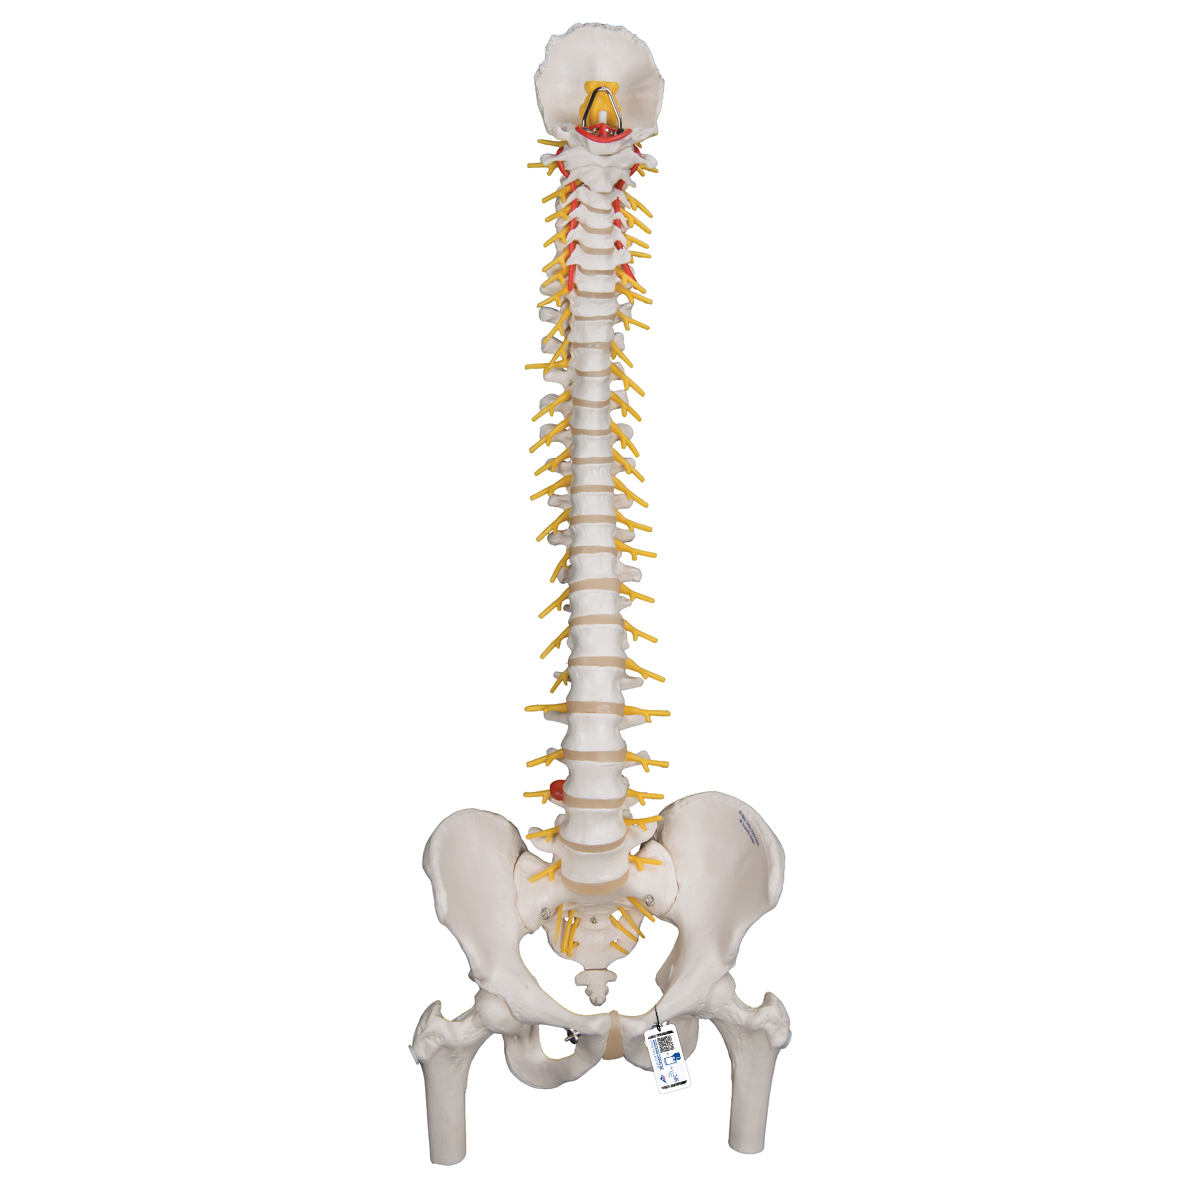 Deluxe Flexible Human Spine Model with Femur Heads & Sacral Opening - 3B Smart Anatomy